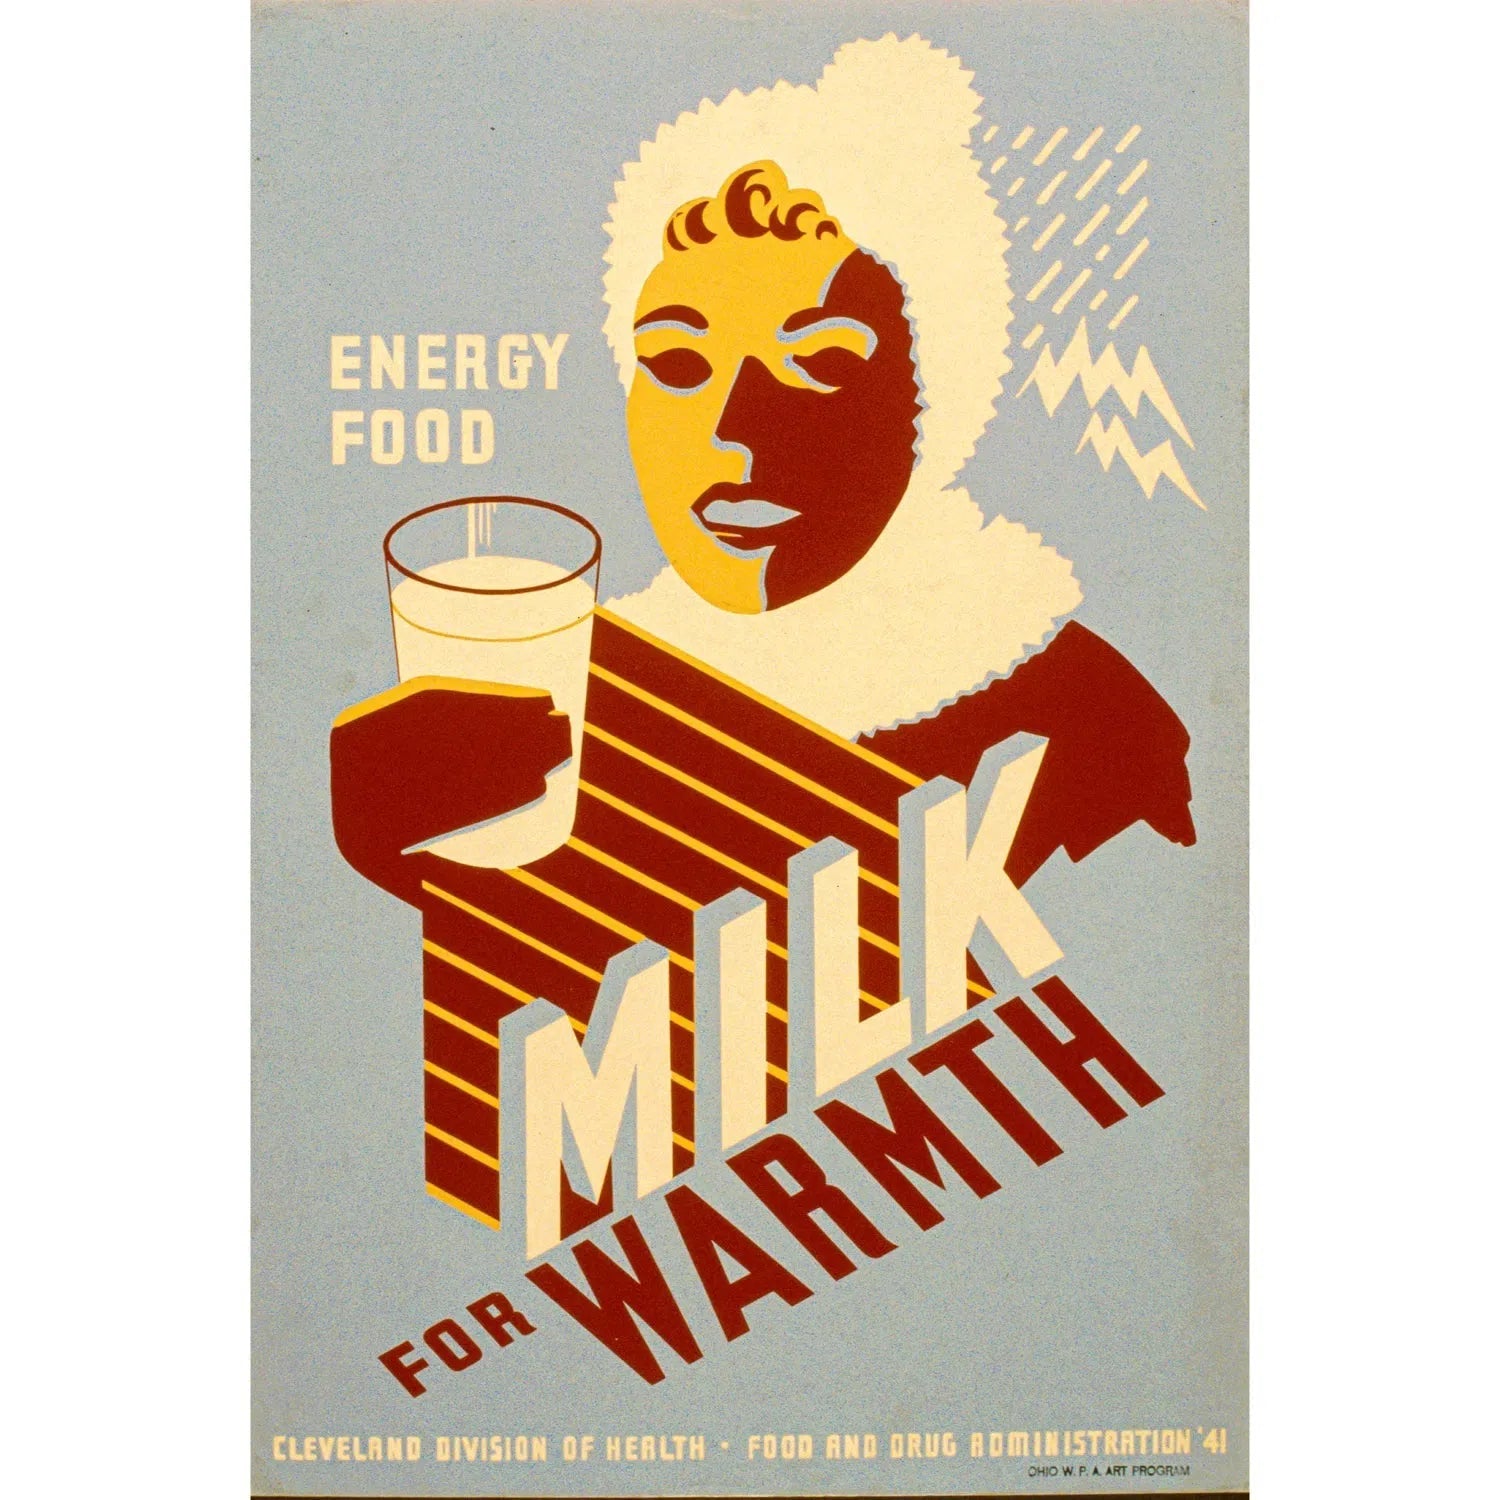 Milk for warmth - Energy food-Imagesdartistes